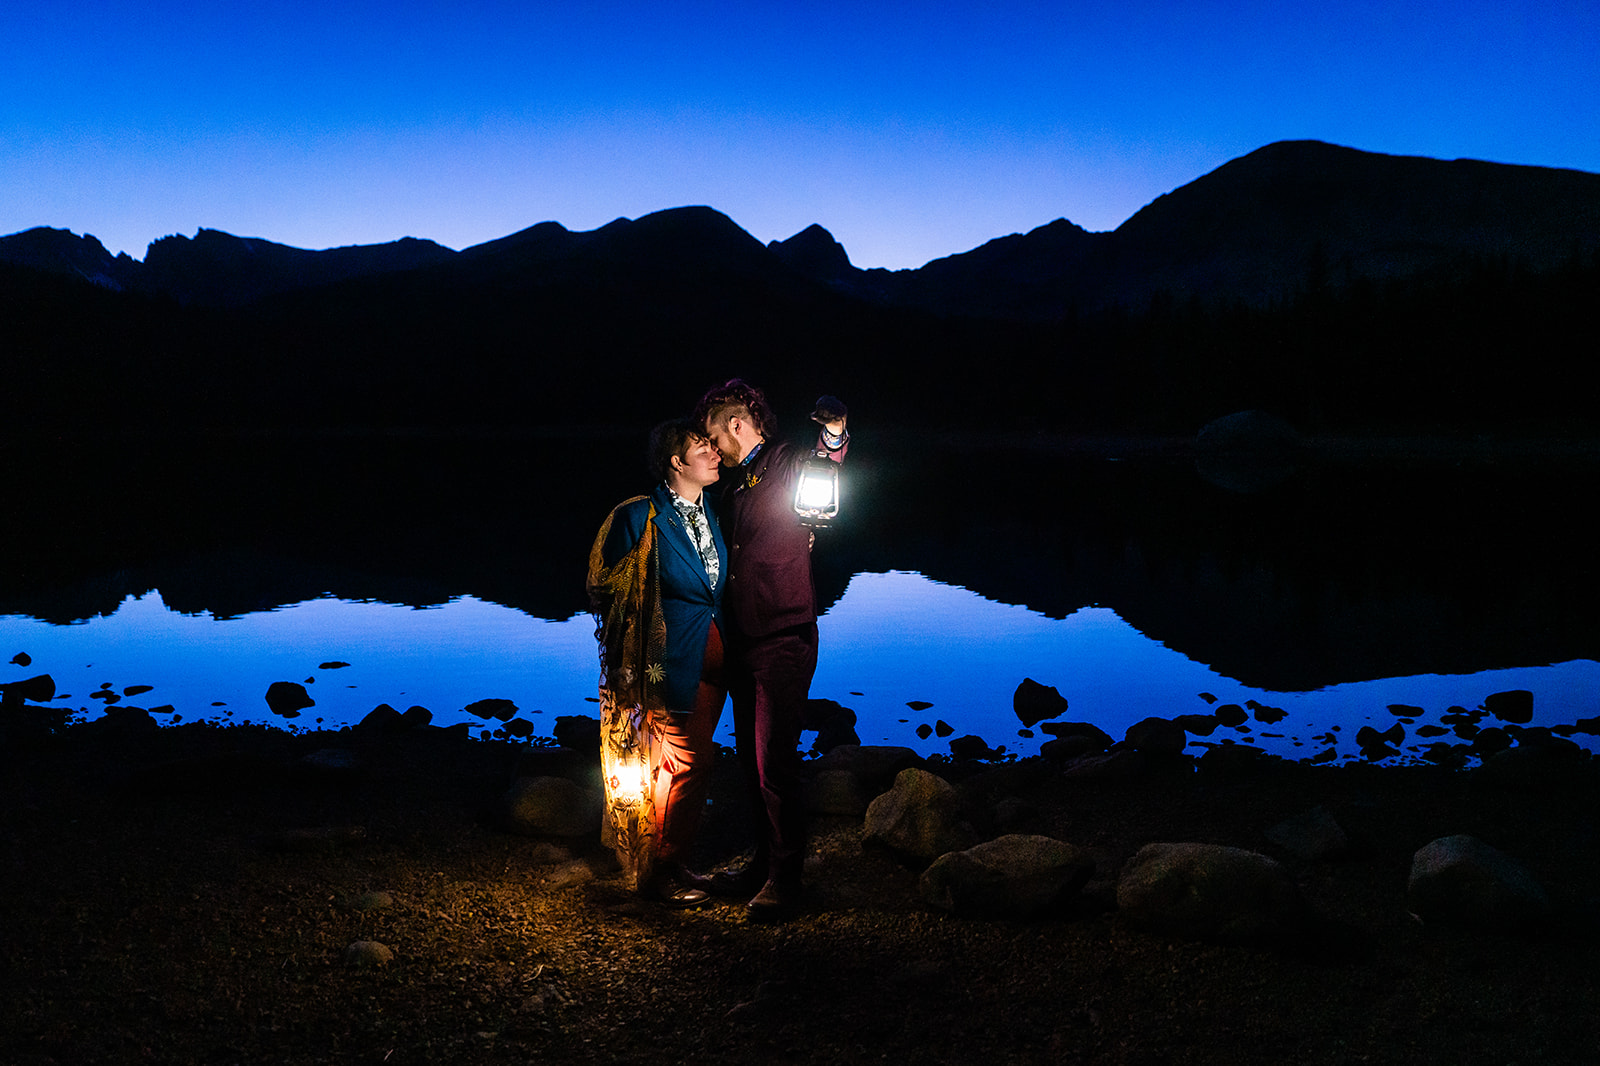 Two people holding lanterns in front of a lake at night.